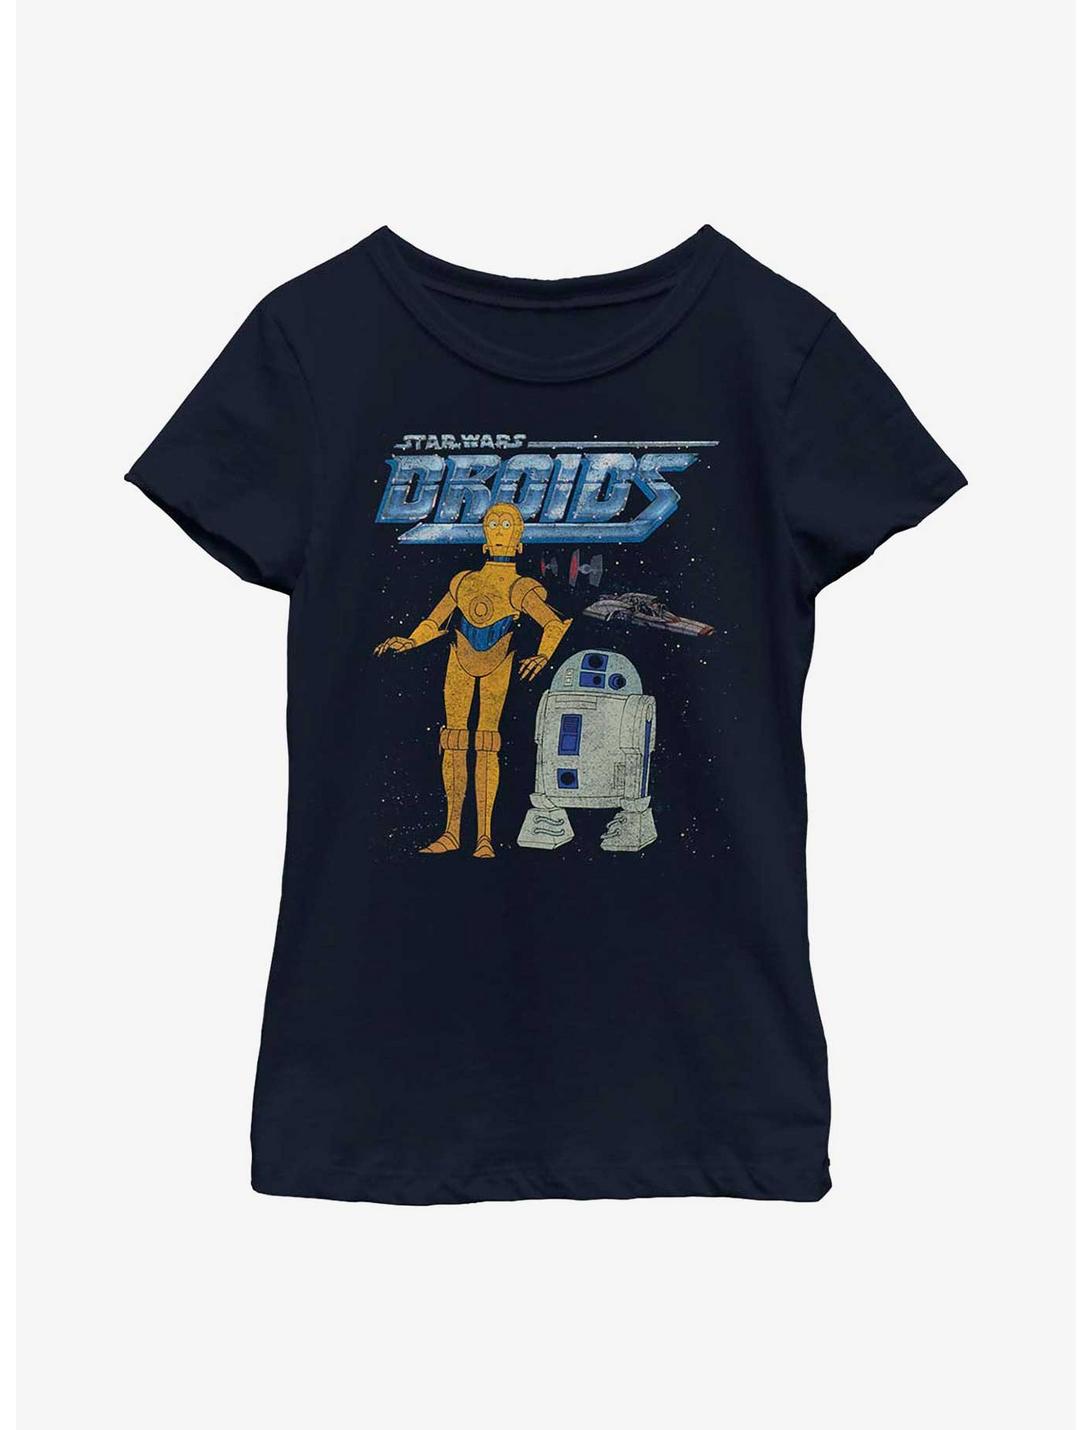 Star Wars R2-D2 And C-3PO Youth Girls T-Shirt, NAVY, hi-res